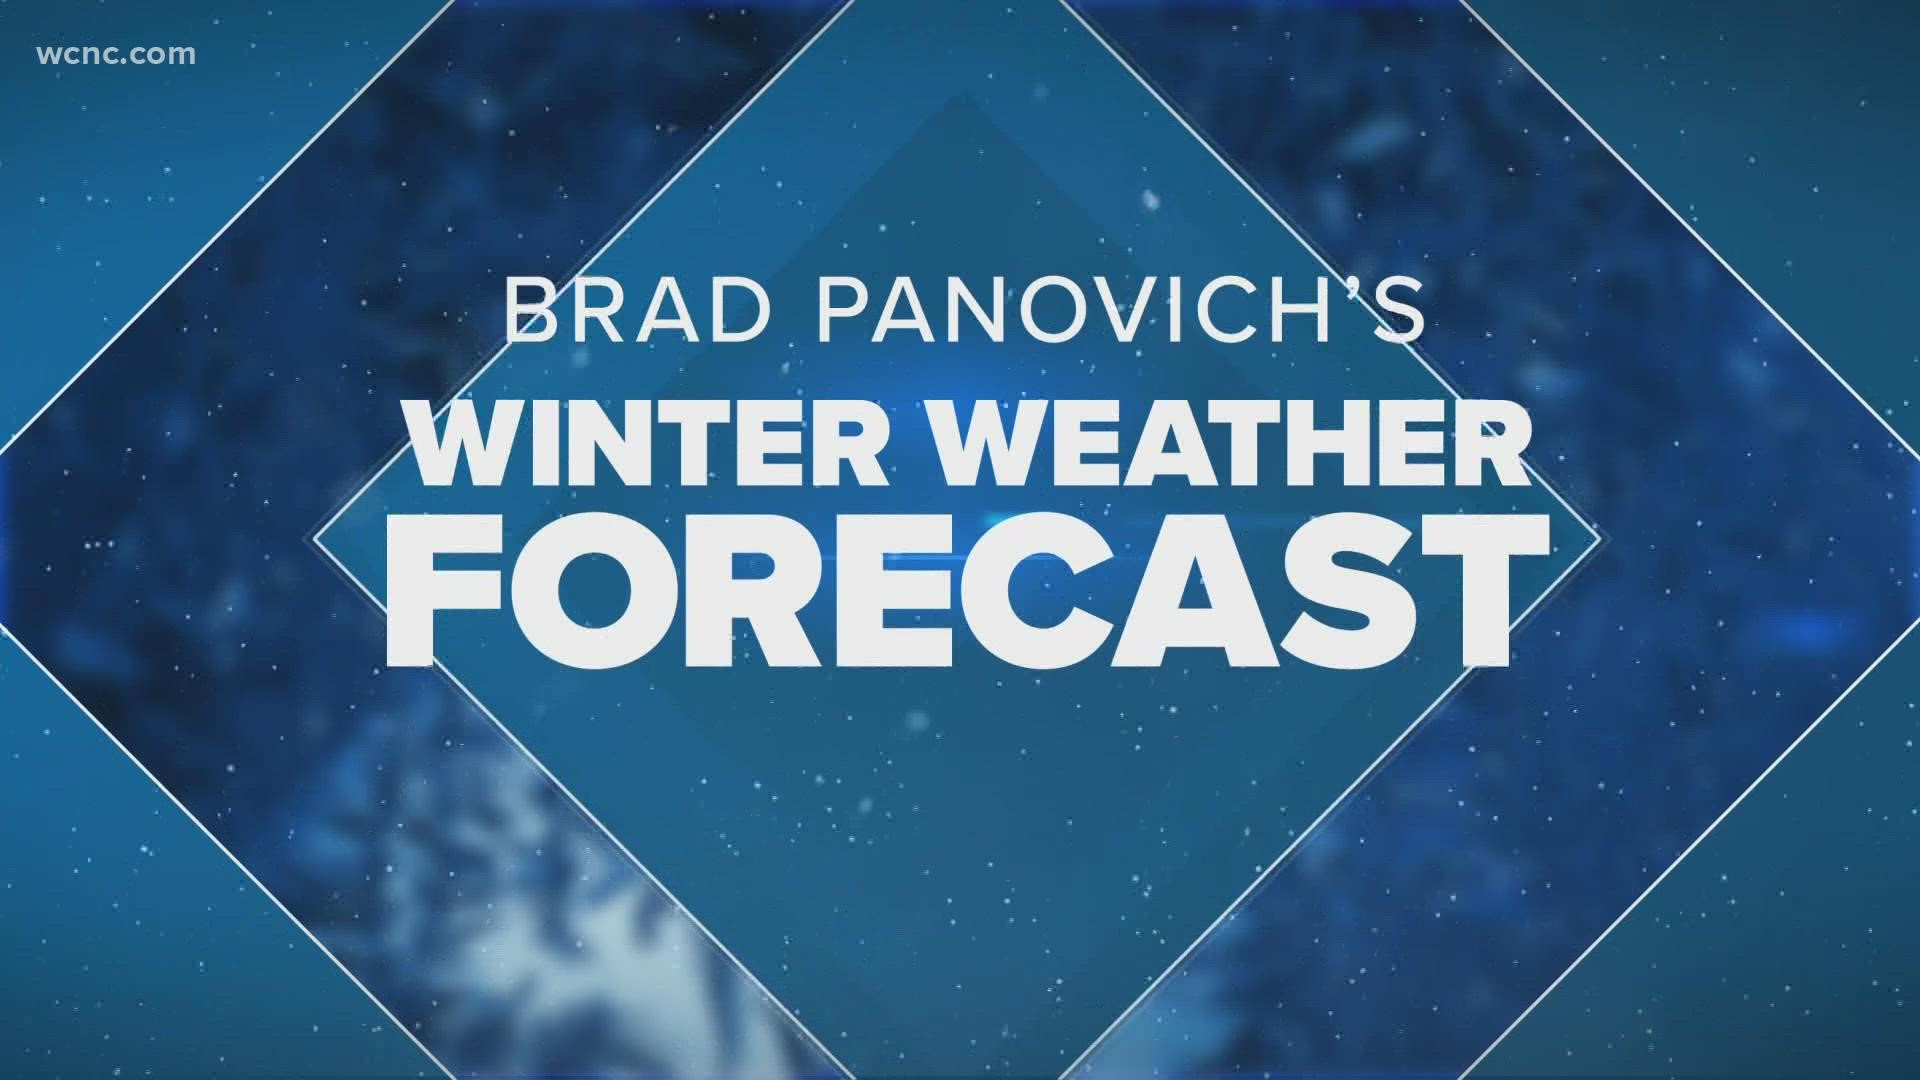 In his annual forecast, Brad examines just how cold and snowy the 2021-22 winter could be in the Carolinas.